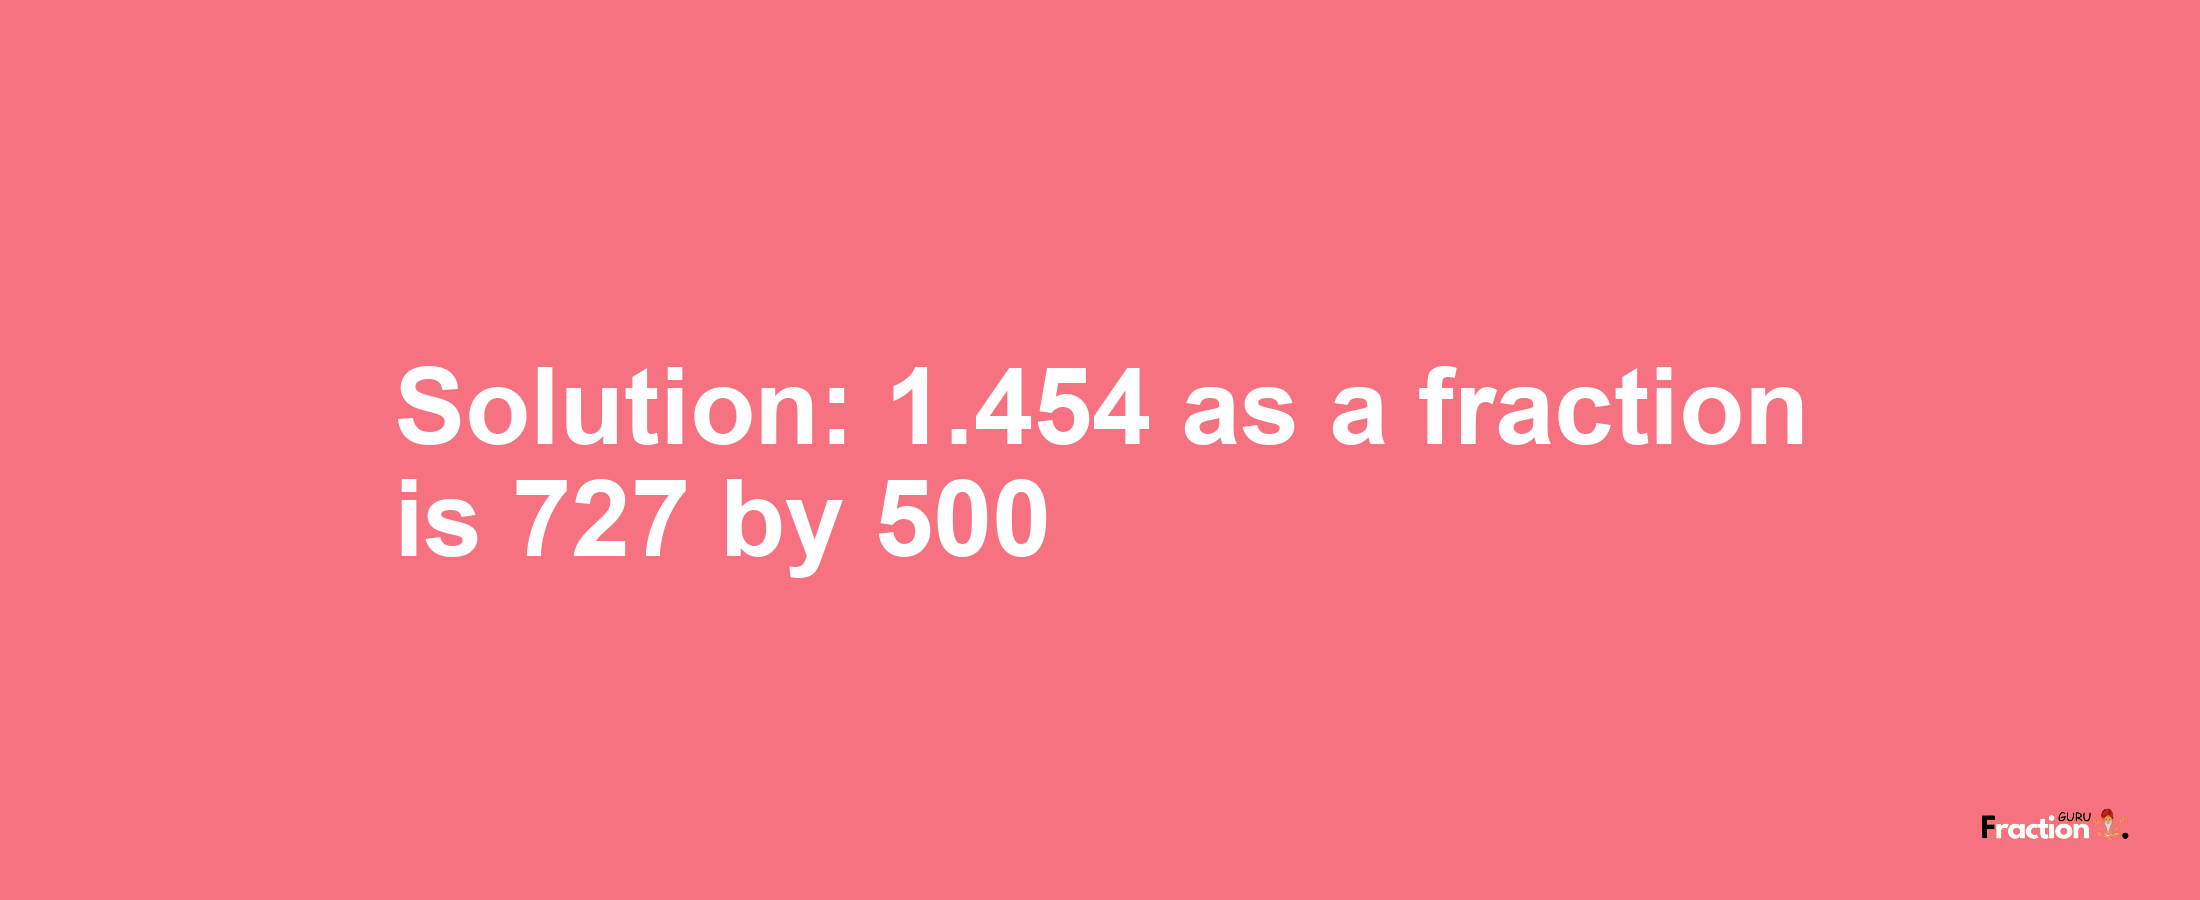 Solution:1.454 as a fraction is 727/500